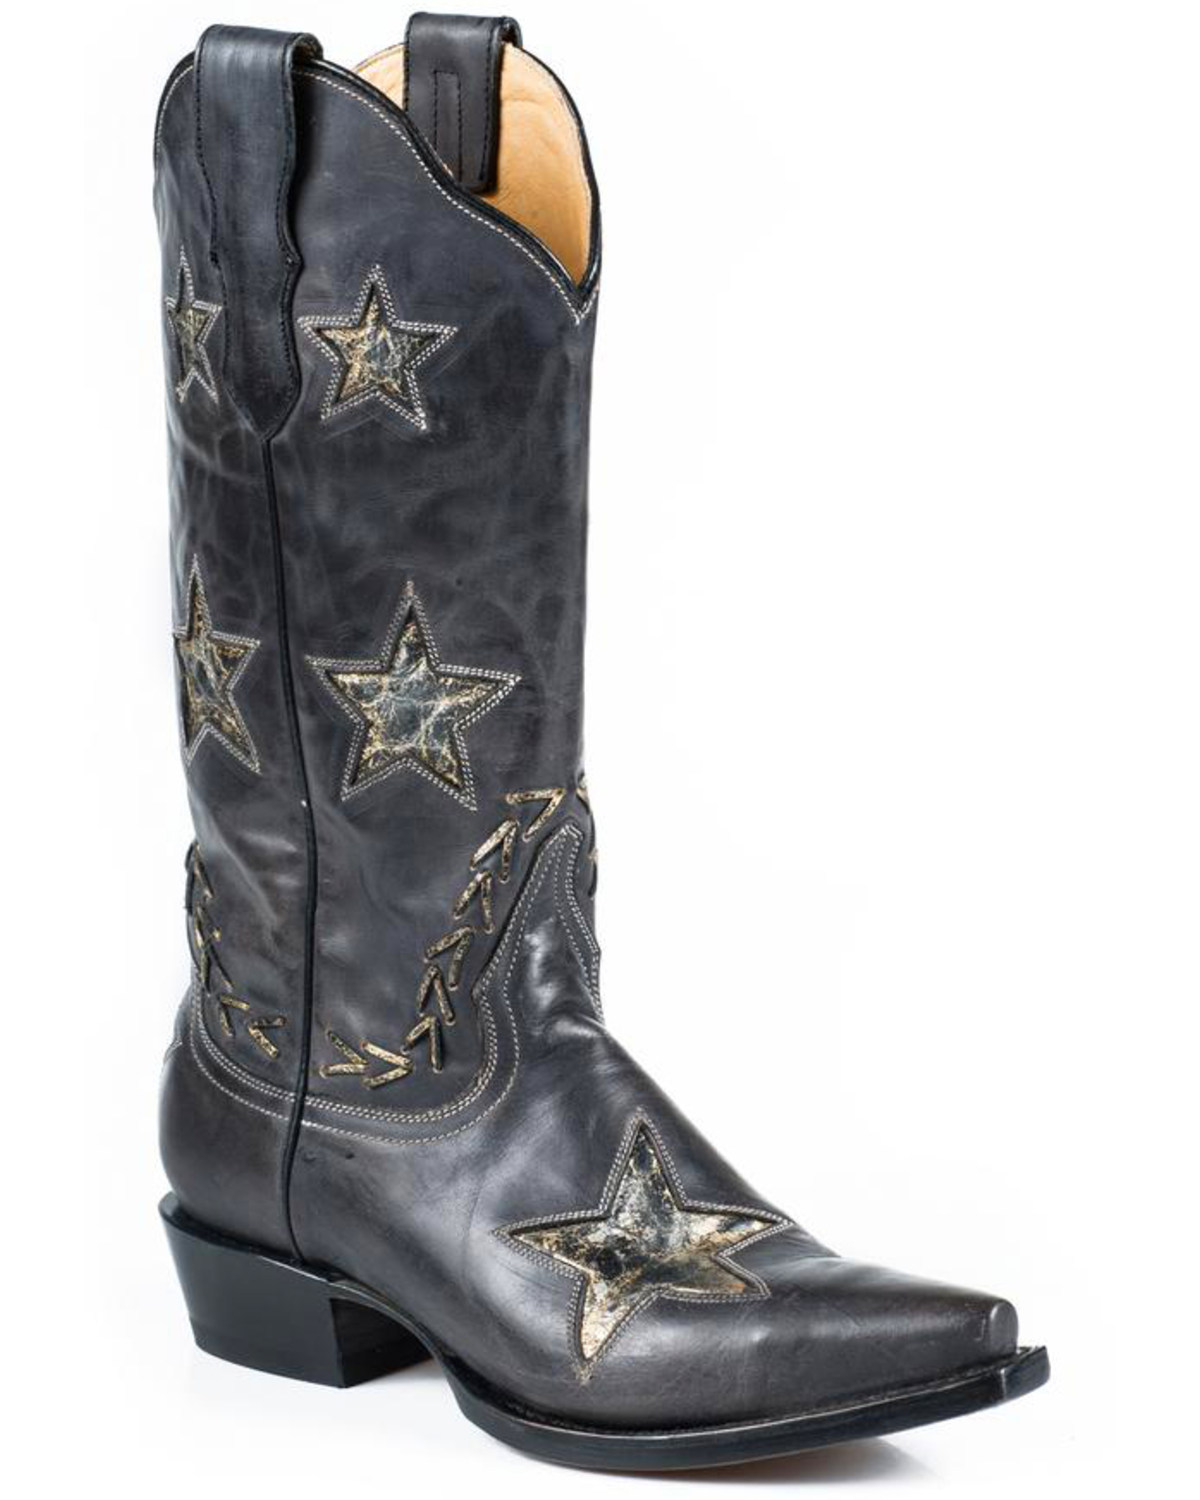 Stetson Star Cowgirl Boots - Snip Toe 